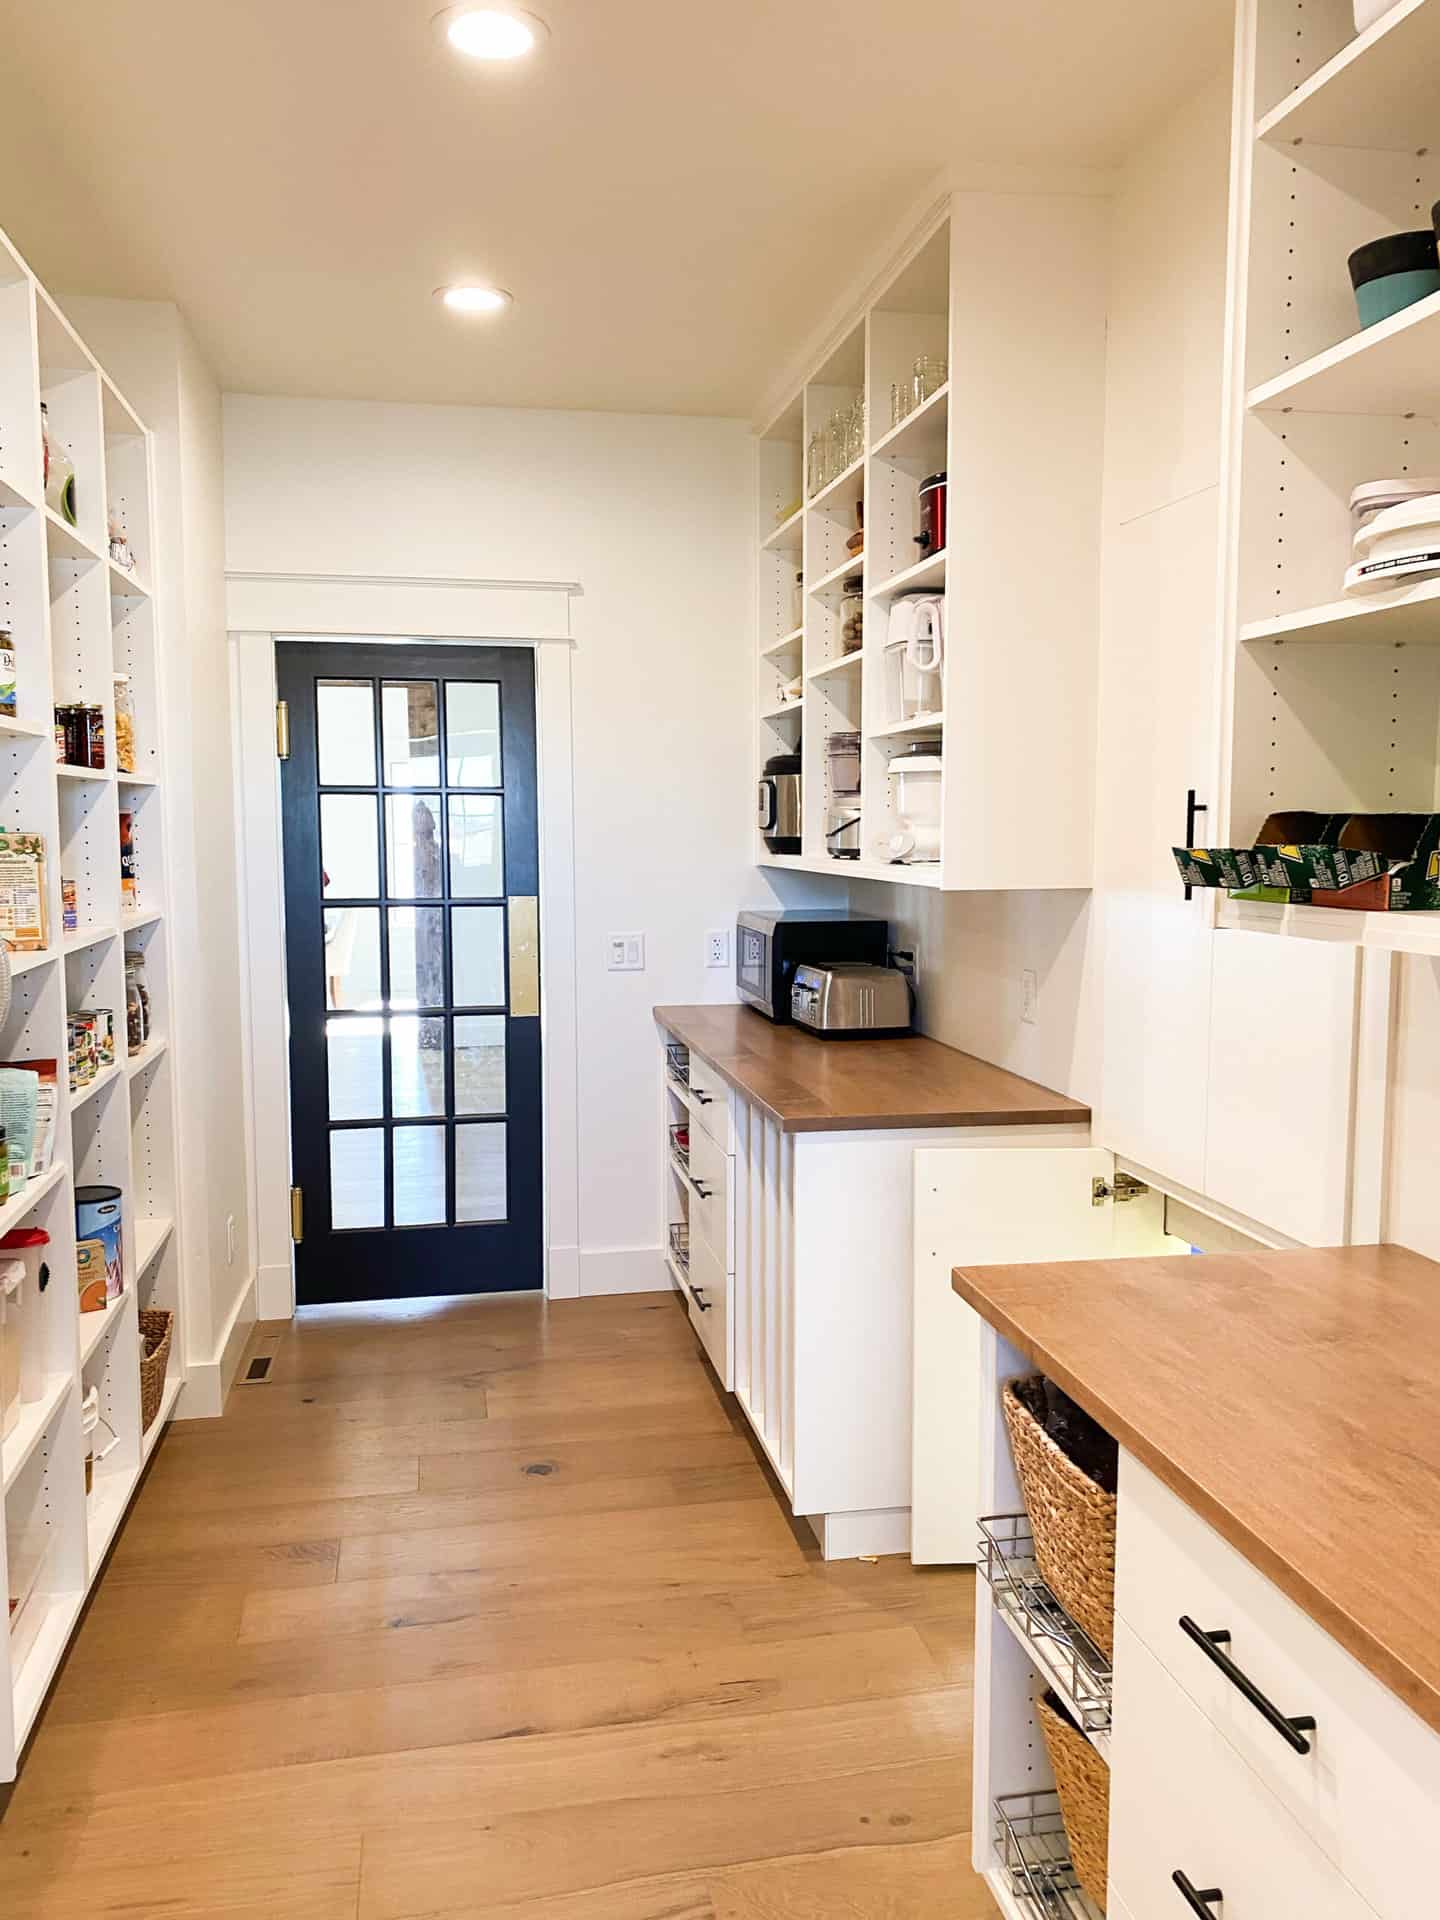 pantry with wooden shelves and cabinets